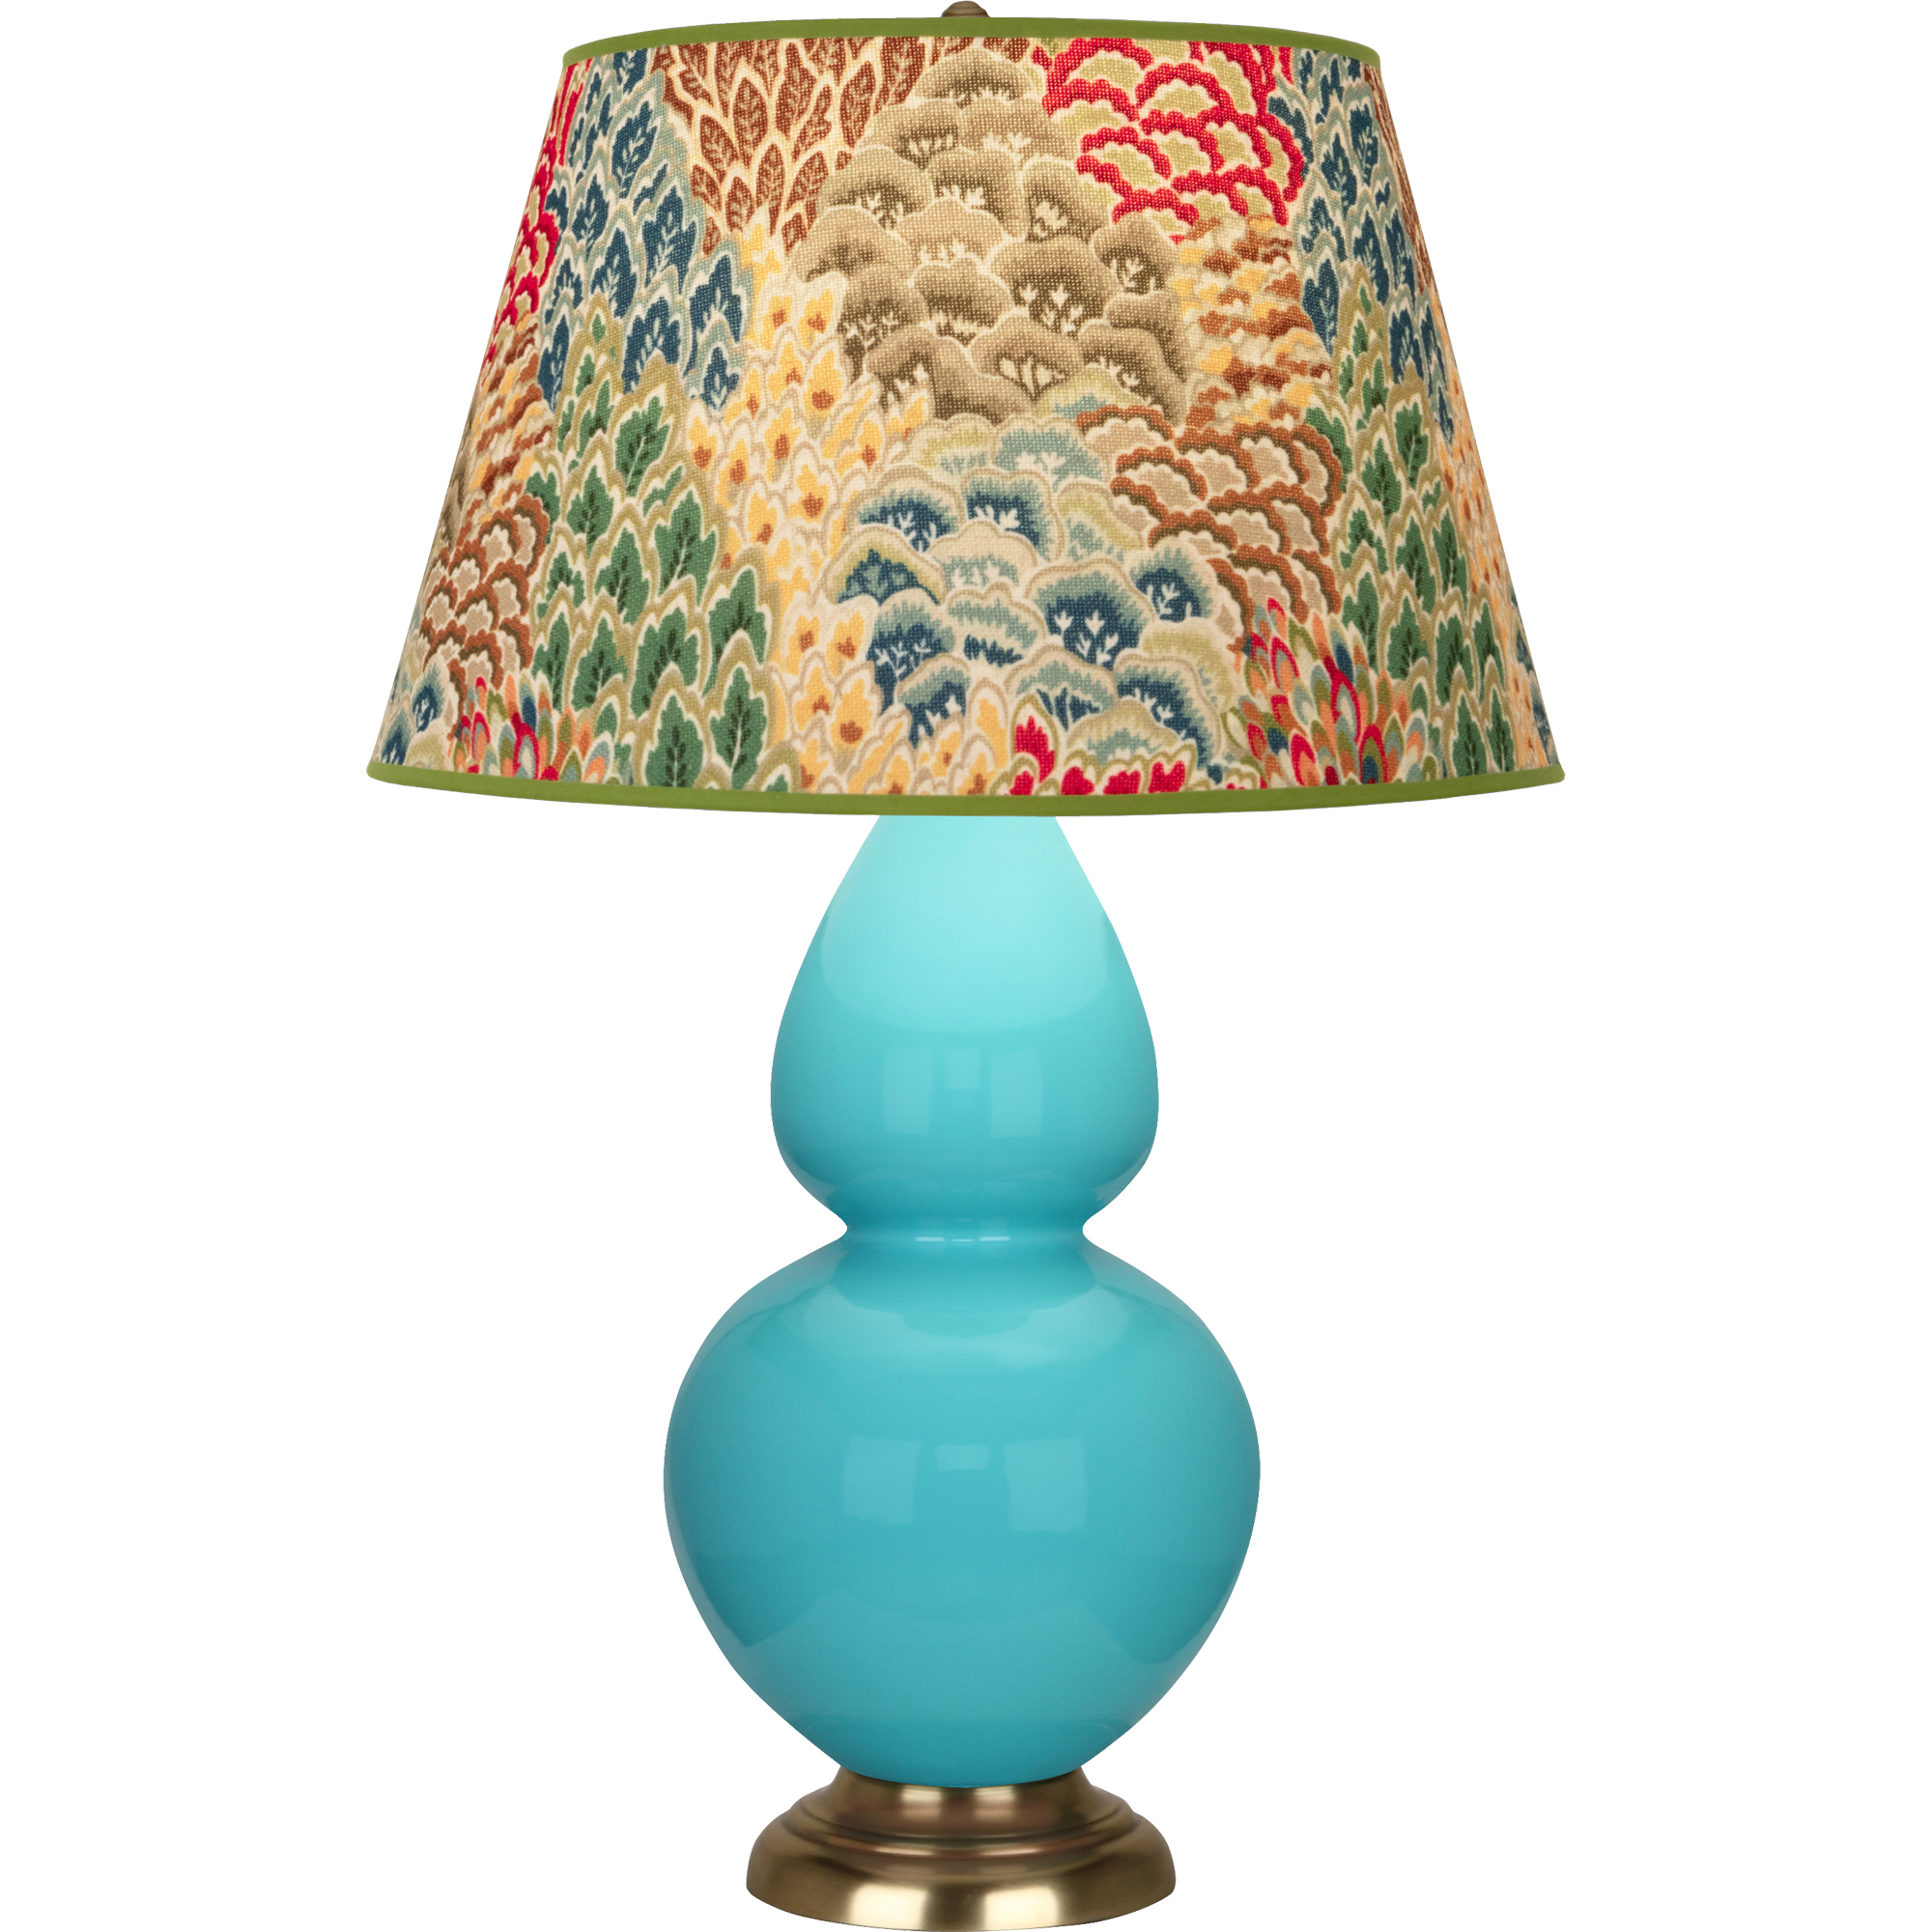 Double Gourd Table Lamp Style #1740F